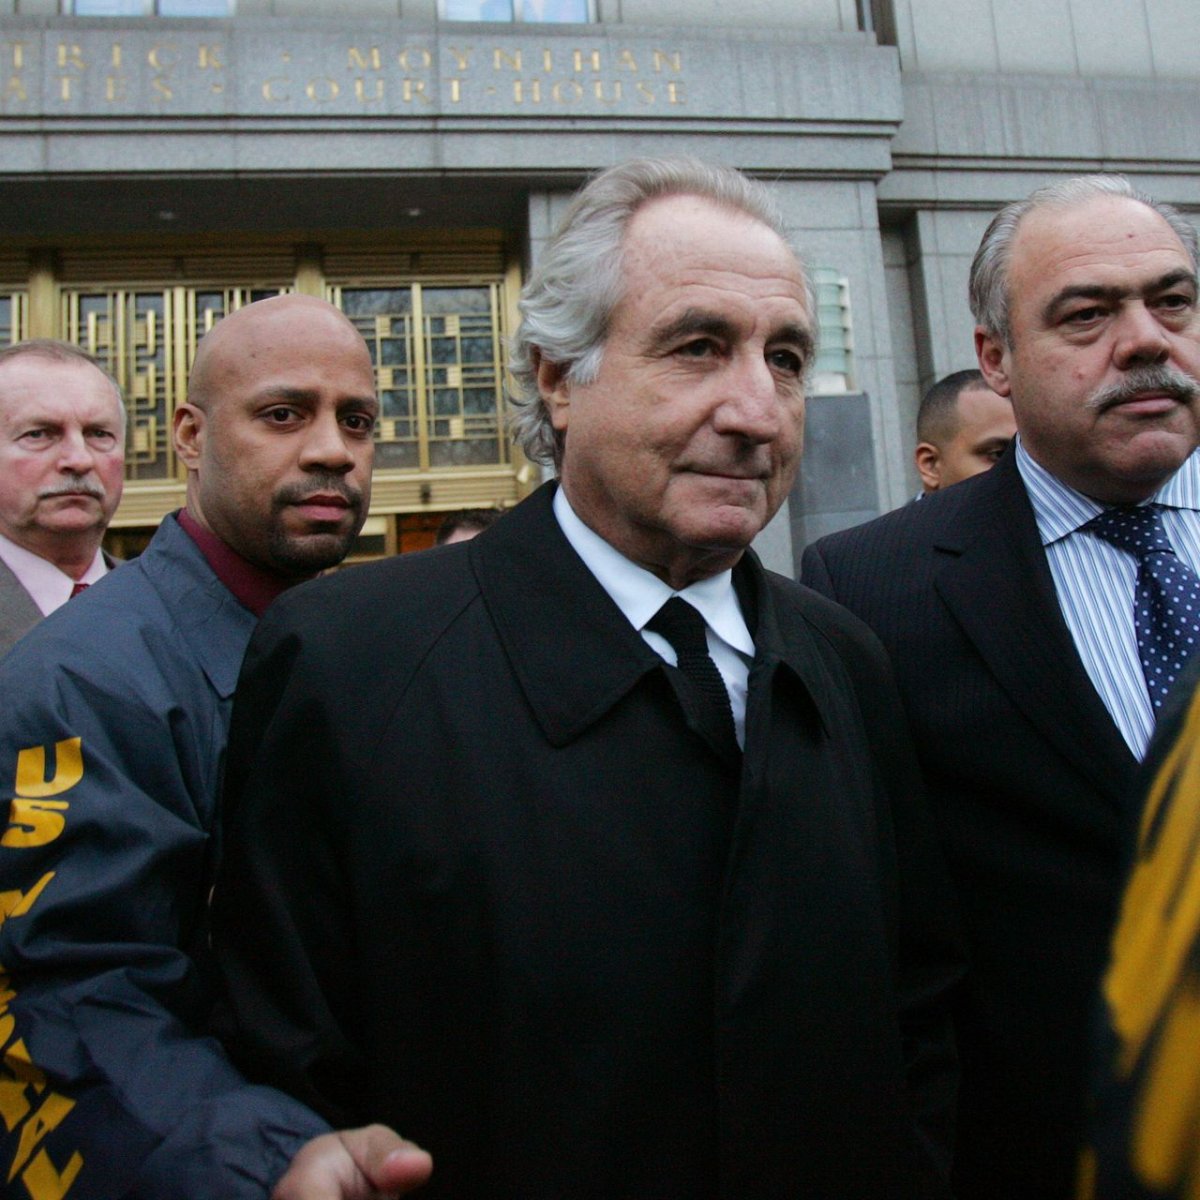 Bernie Madoff, the biggest swindler in the USA, died #1